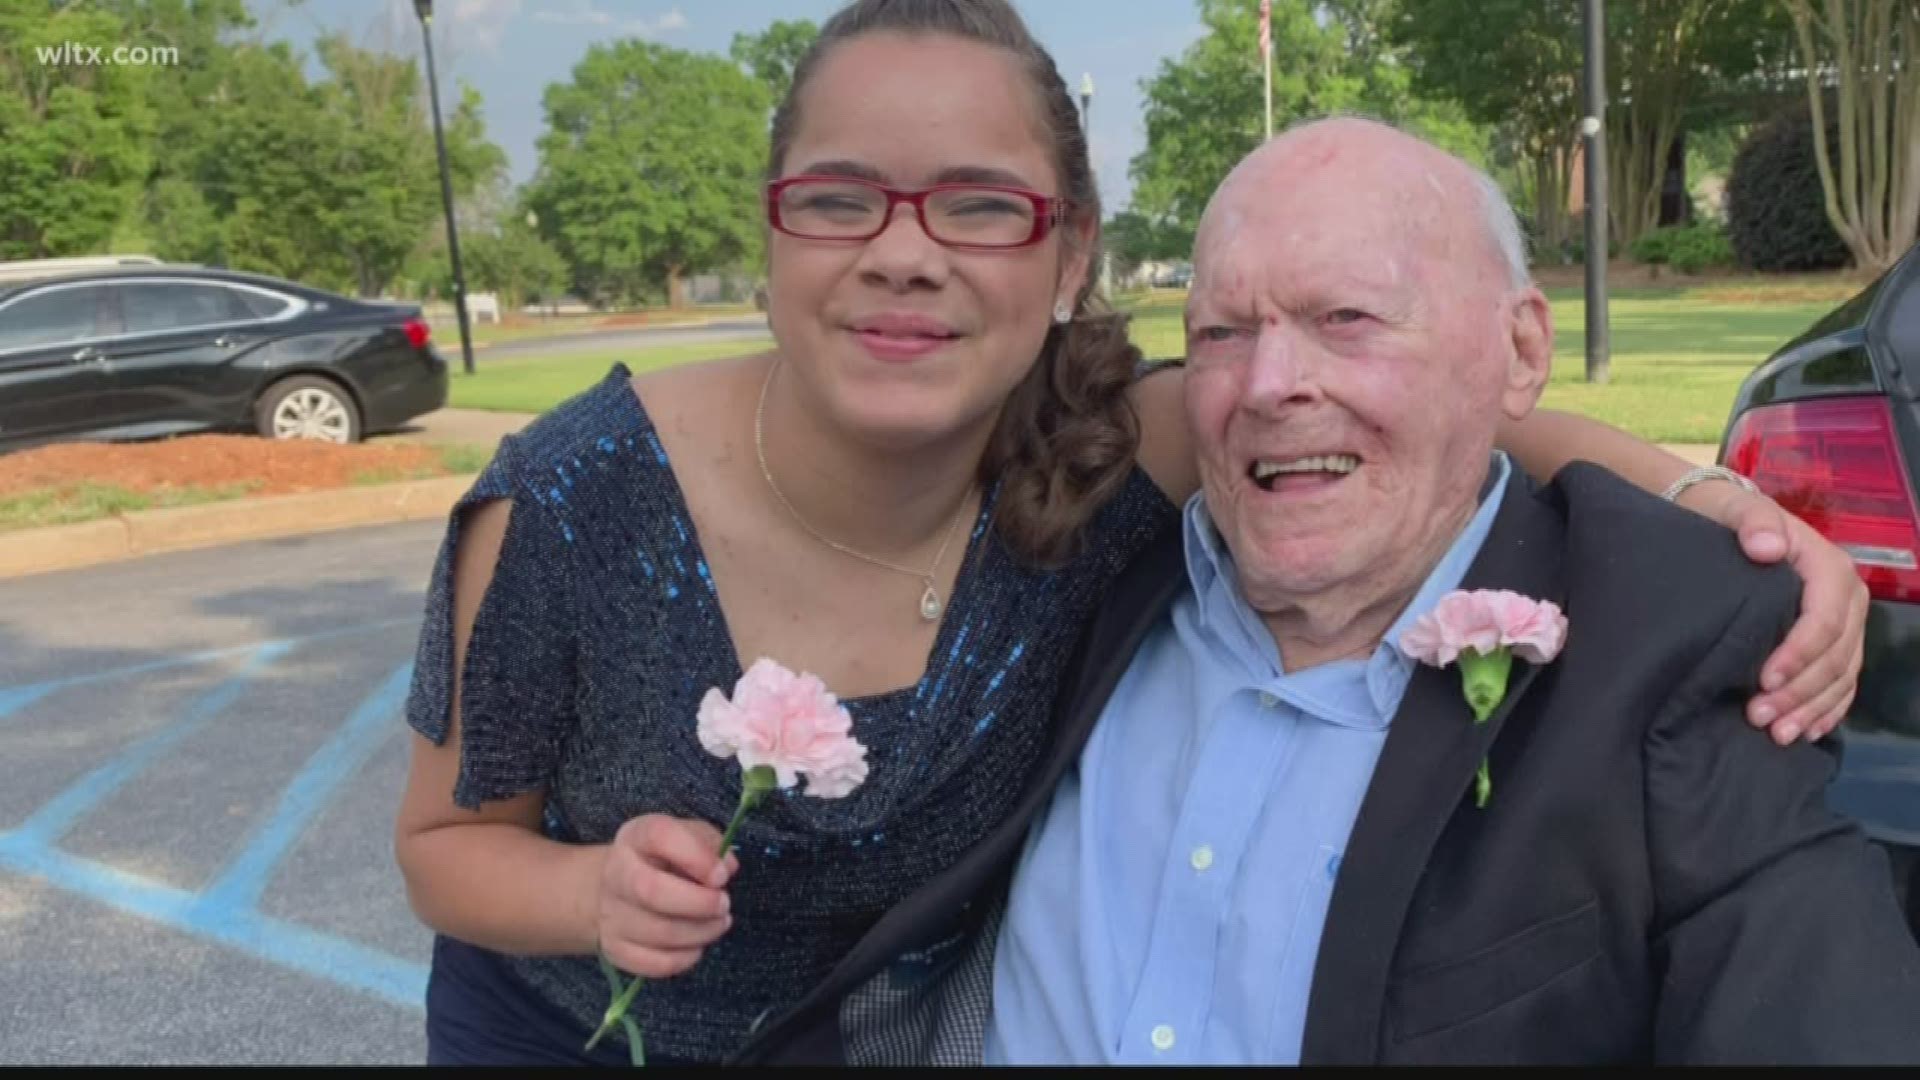 A 107-year-old World War II veteran attended Chapin High School's ROTC ball after being invited by a student.